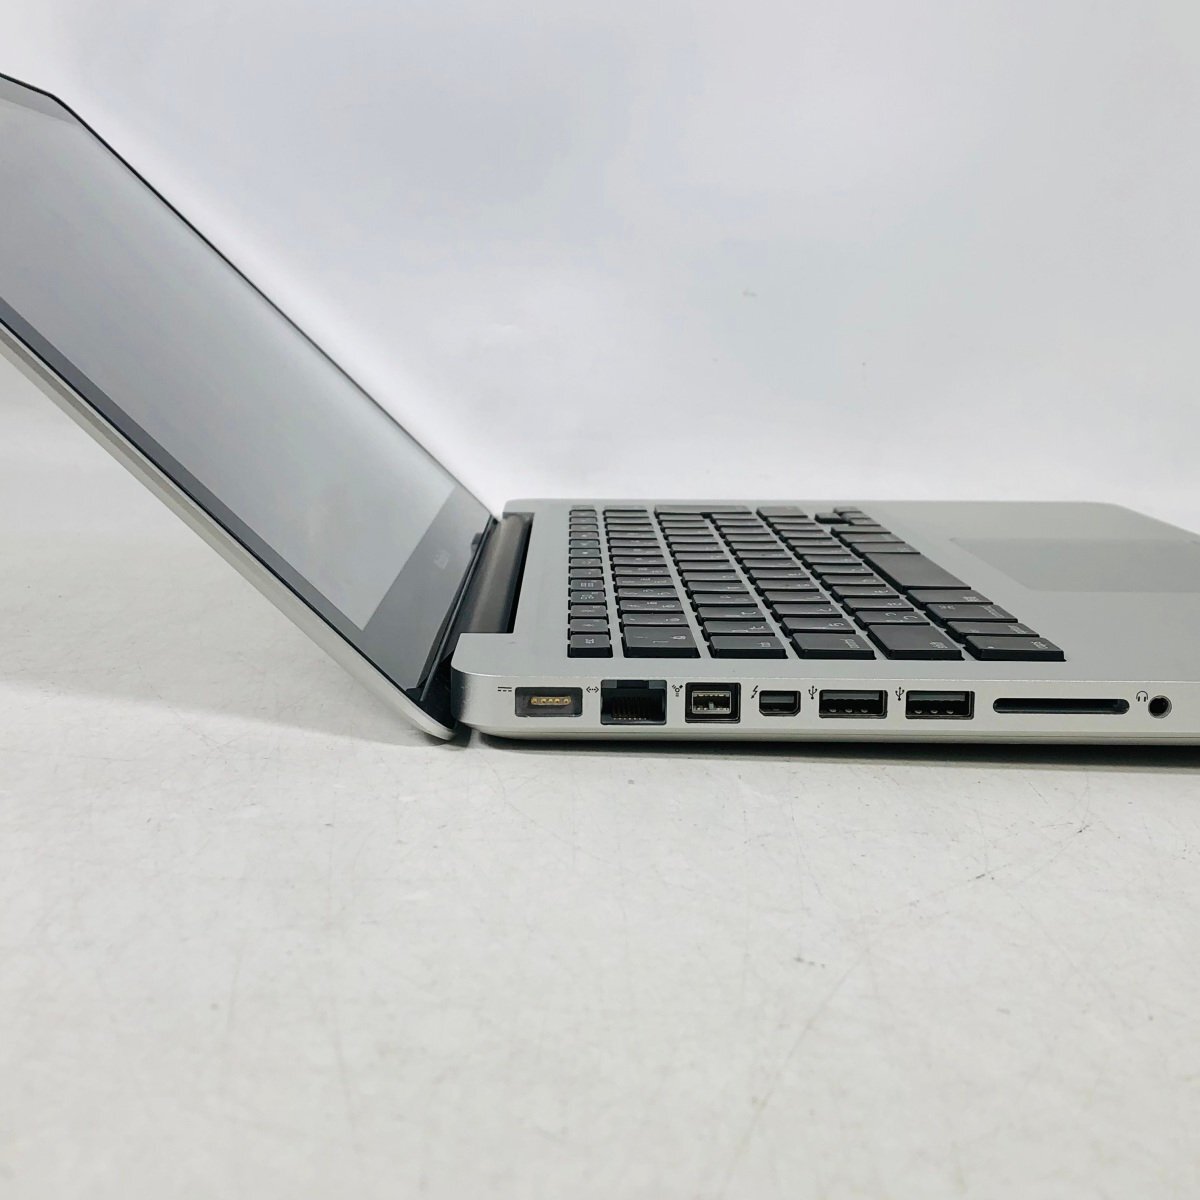  operation verification ending MacBook Pro 13 -inch (Mid 2012) Core i5 2.5GHz/4GB/500GB MD101J/A